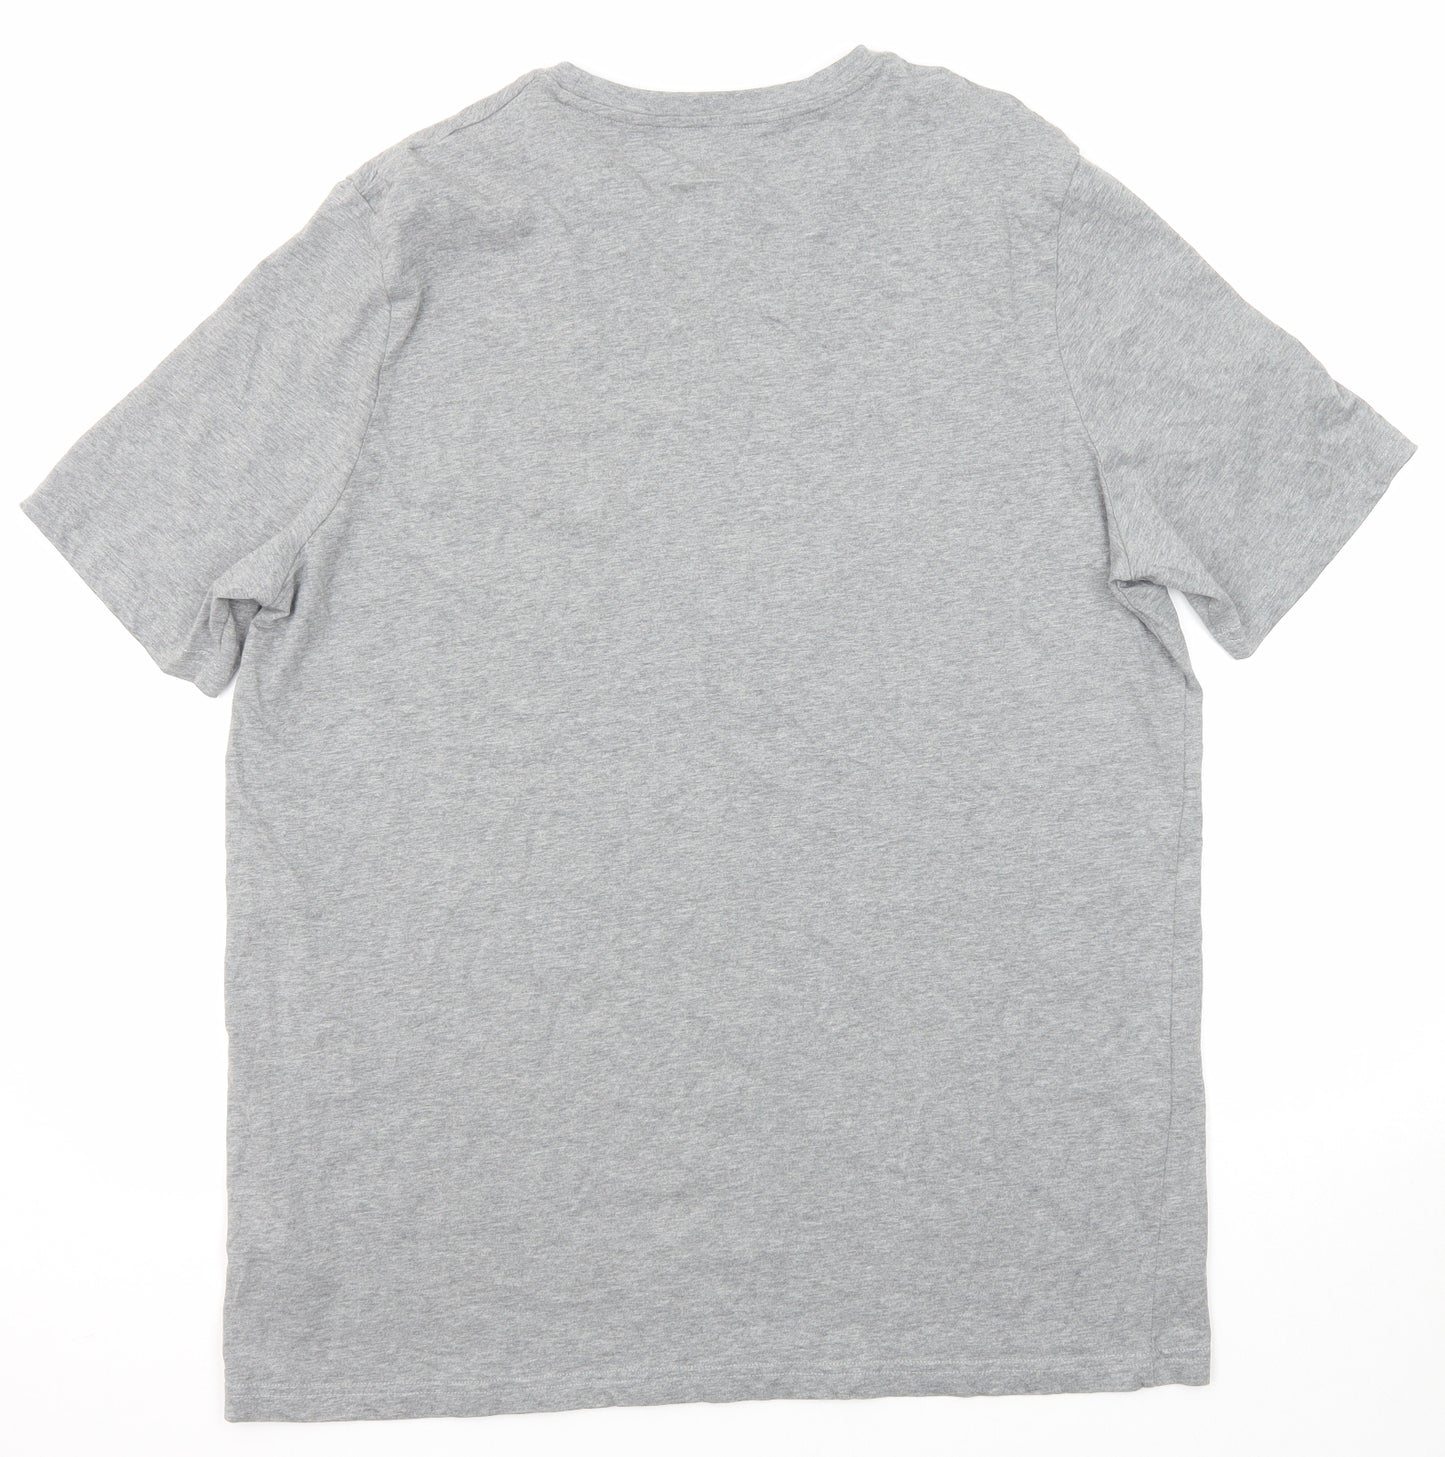 Marks and Spencer Mens Grey Cotton T-Shirt Size 2XL Round Neck